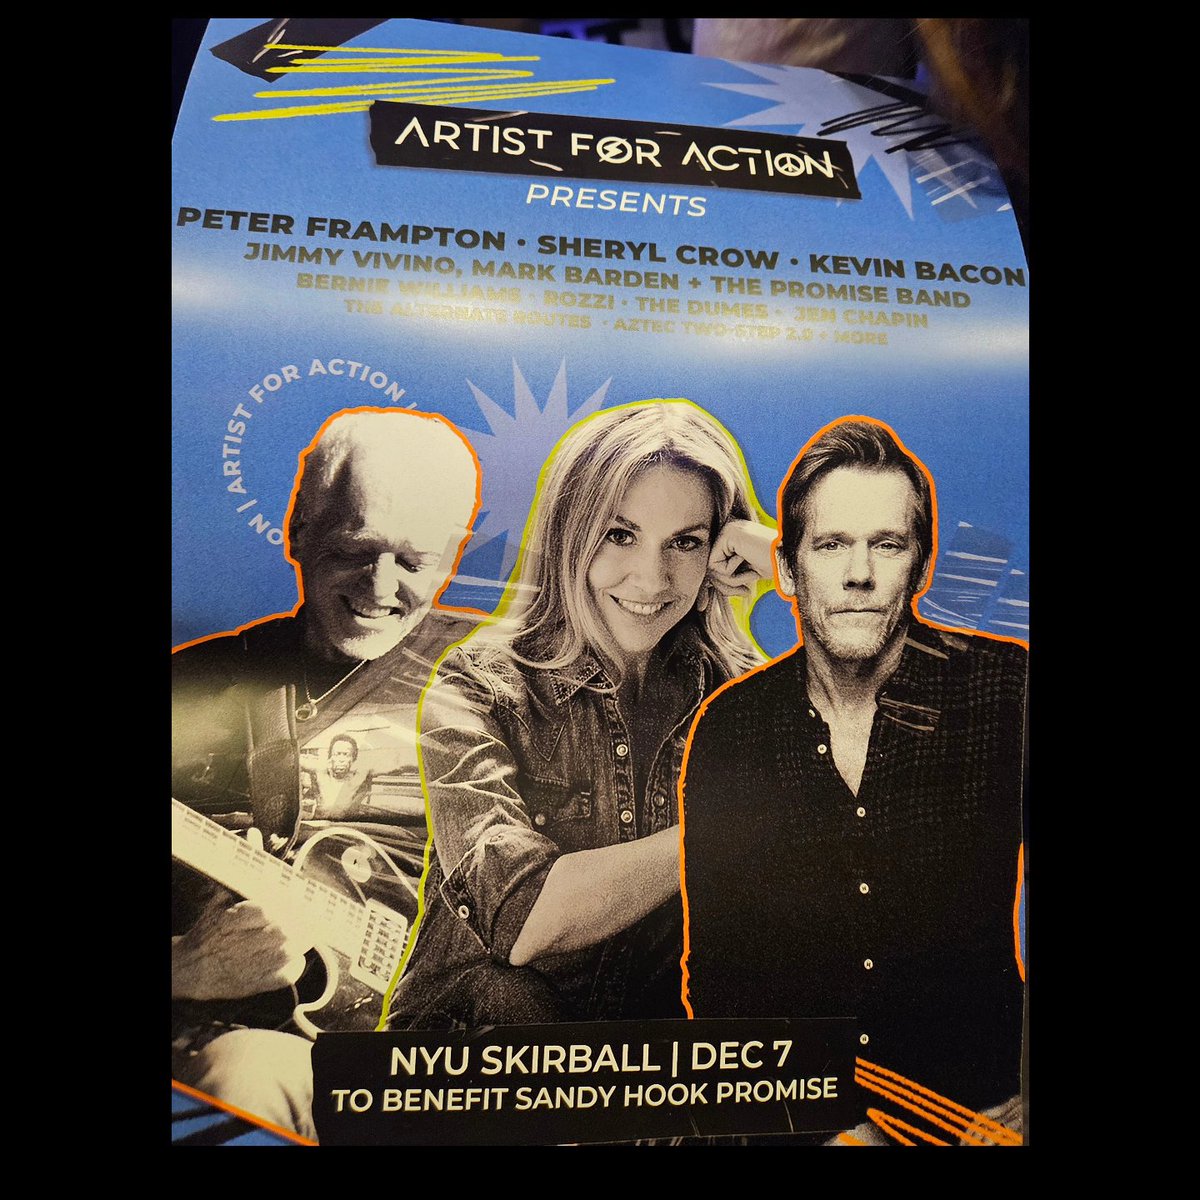 Wonderful event tonight by @ArtistforAction and @sandyhook 
Performances by #PeterFrampton, #KevinBacon and @SherylCrow with previews of the heartwarming #afatherspromisemovie